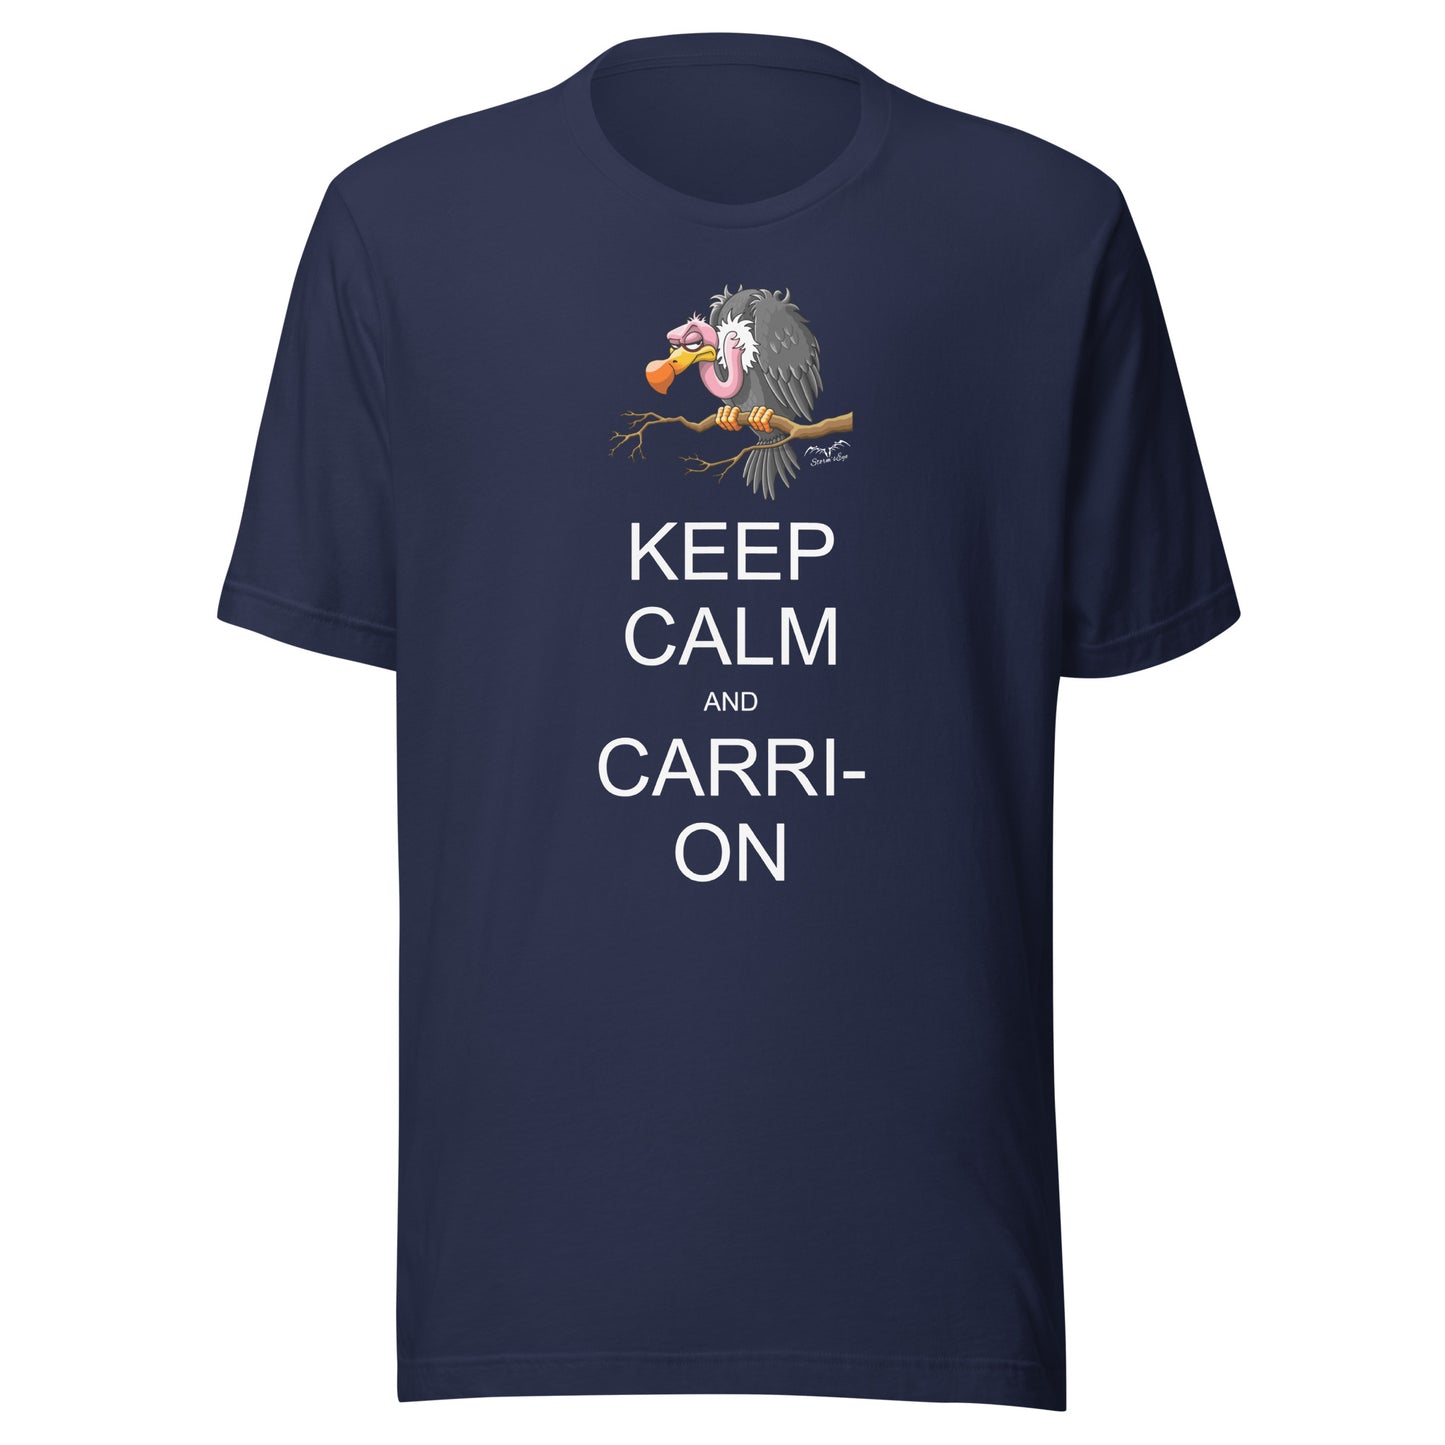 keep calm and carrion vulture t-shirt navy blue by stormseye design